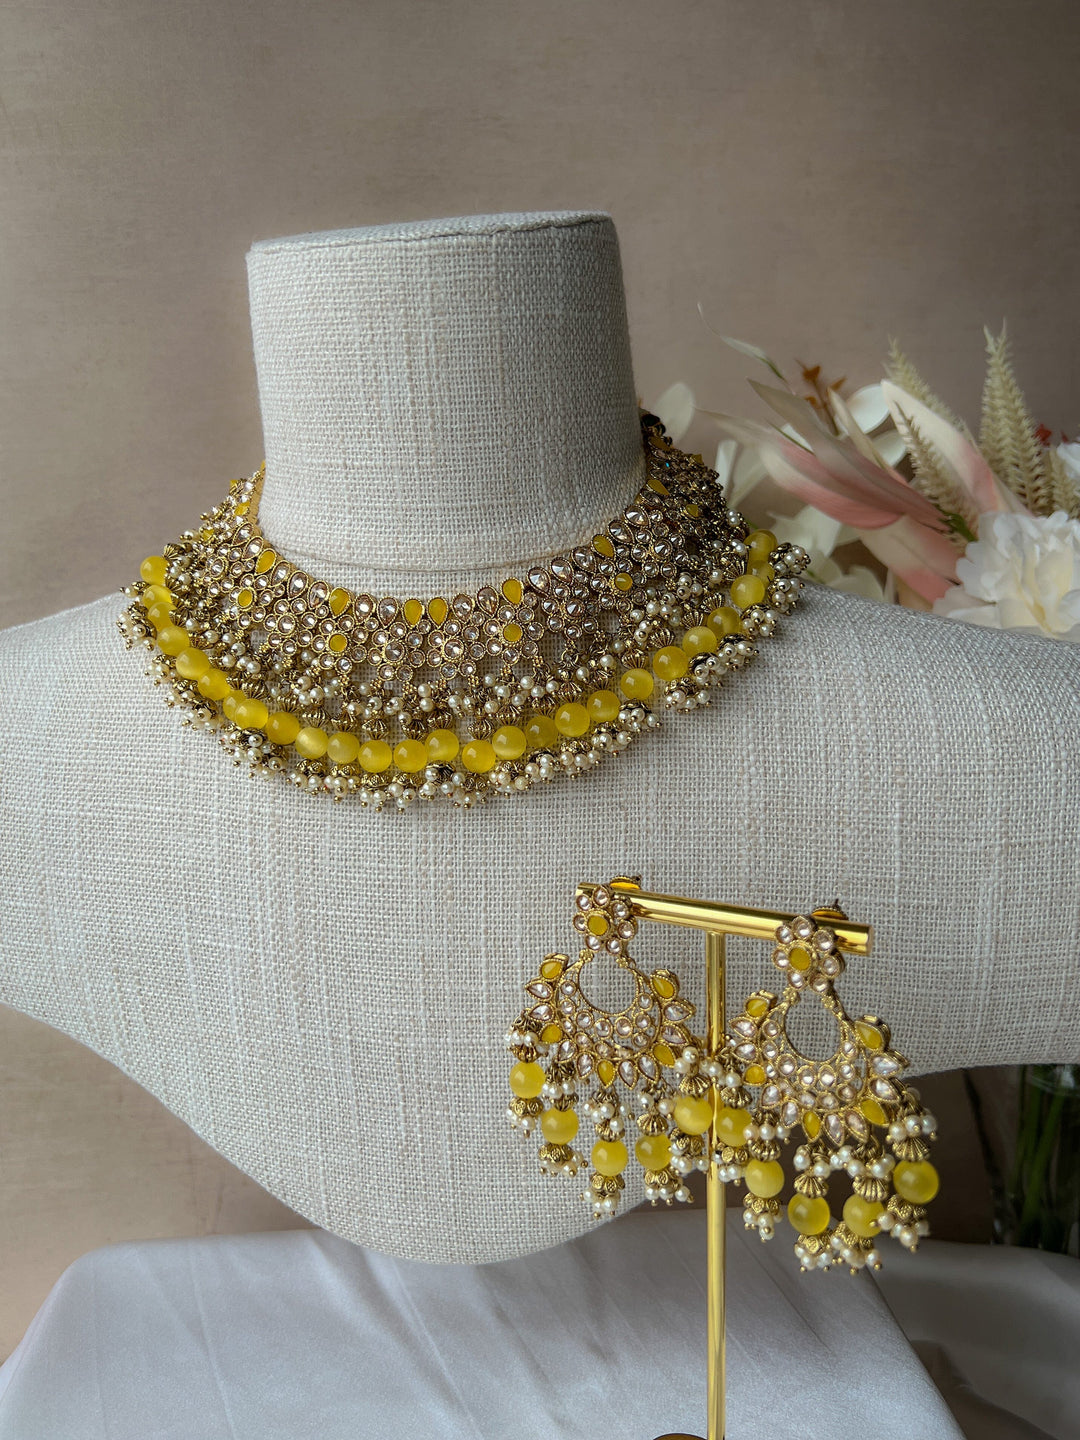 Moderate in Yellow Necklace Sets THE KUNDAN SHOP 